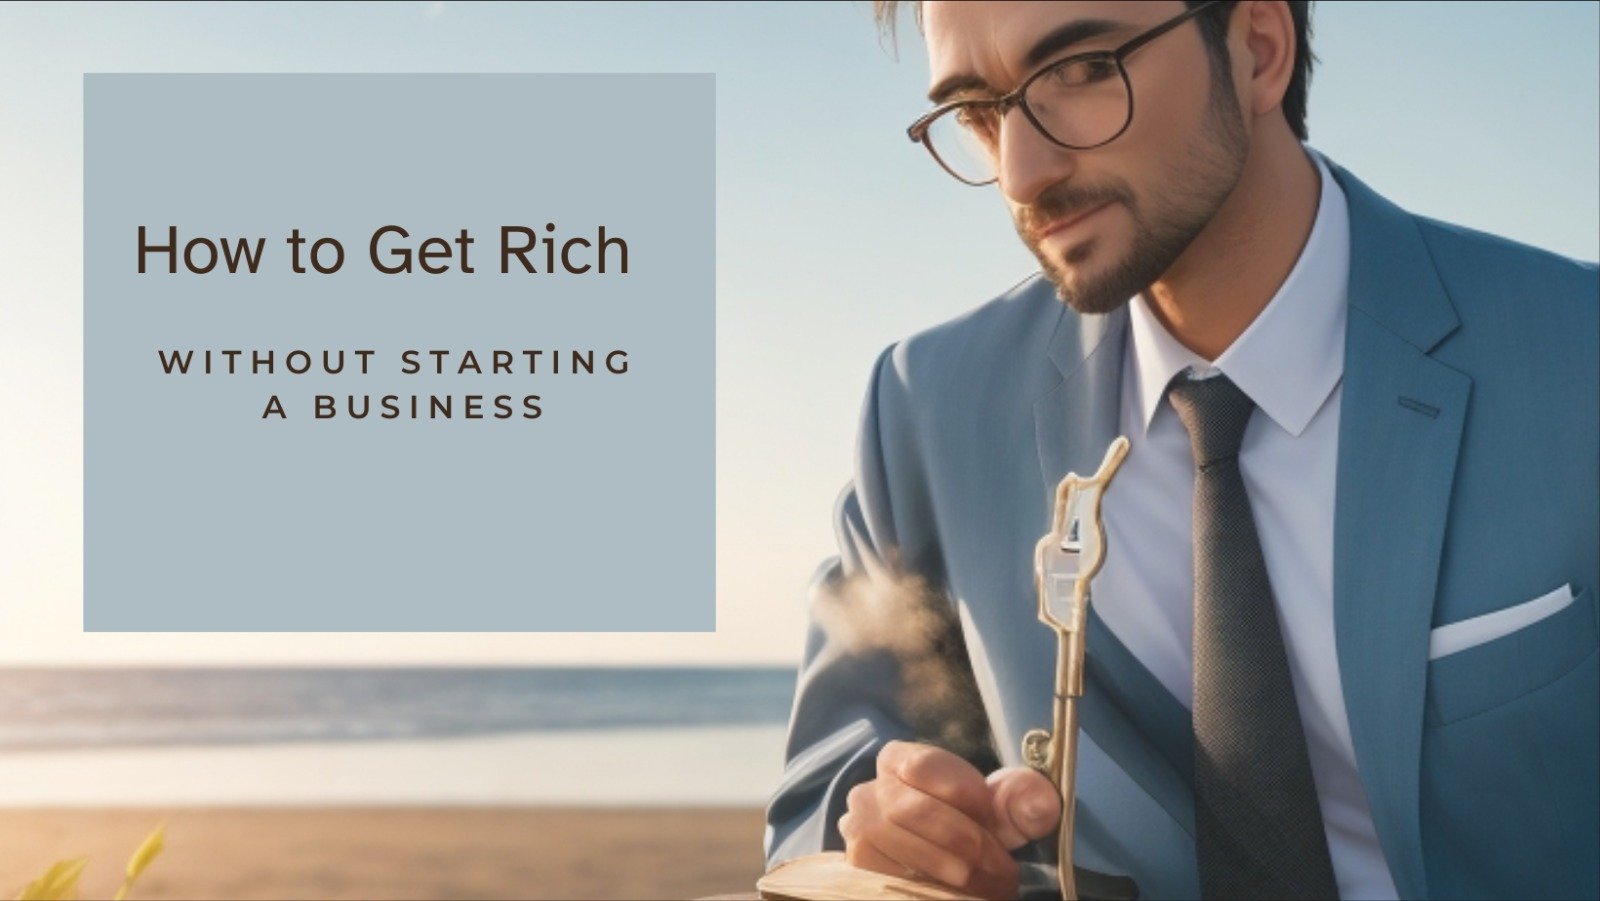 How to Get Rich Without Starting a Business?